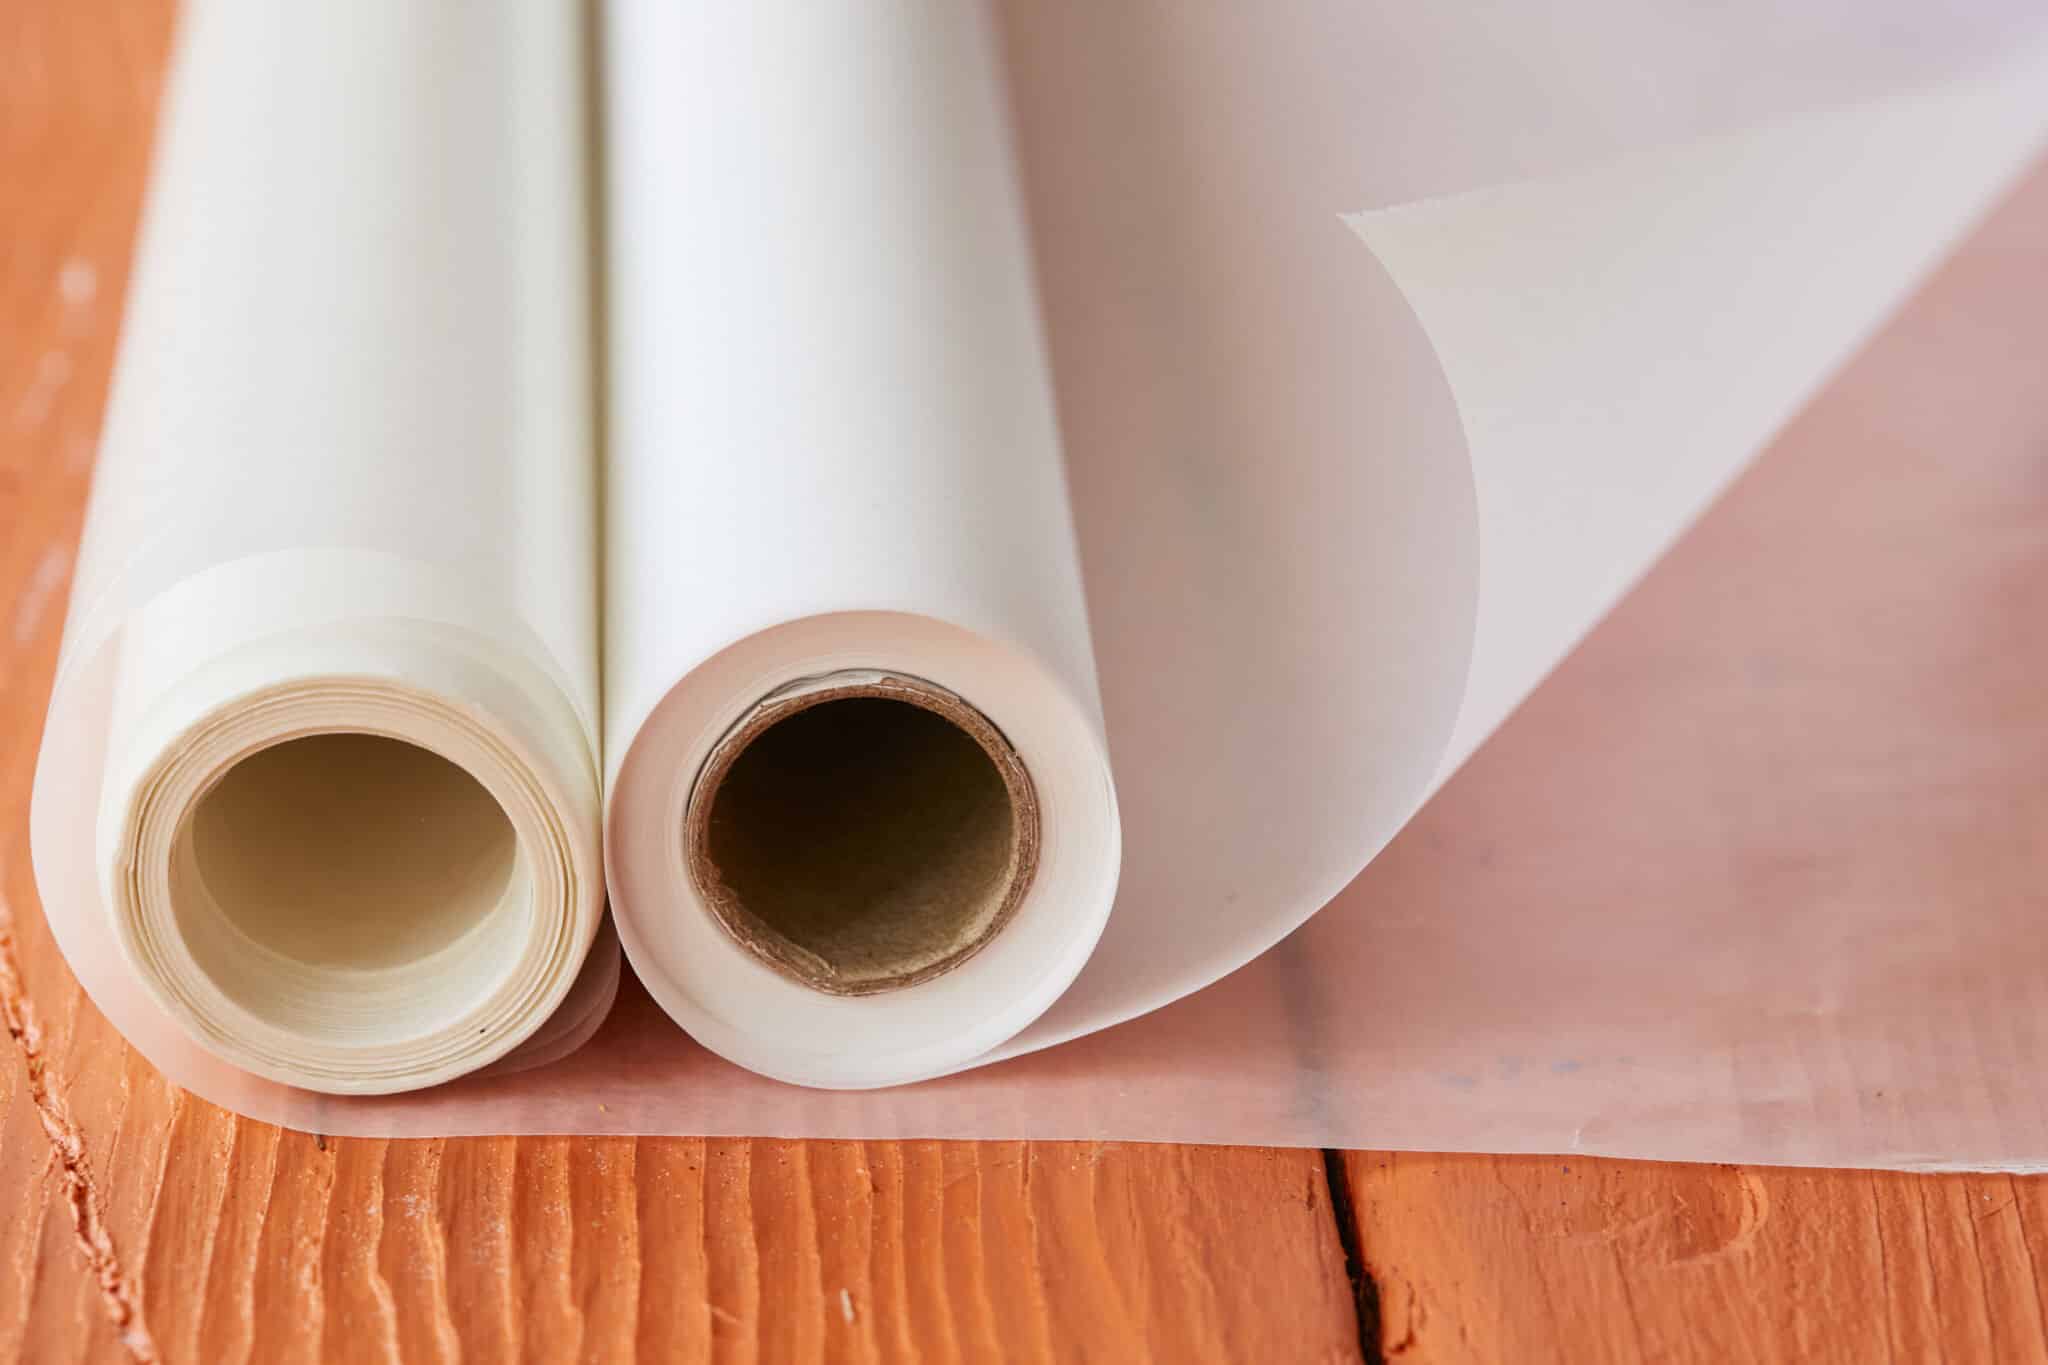 Is Parchment Paper the Same As Wax Paper?